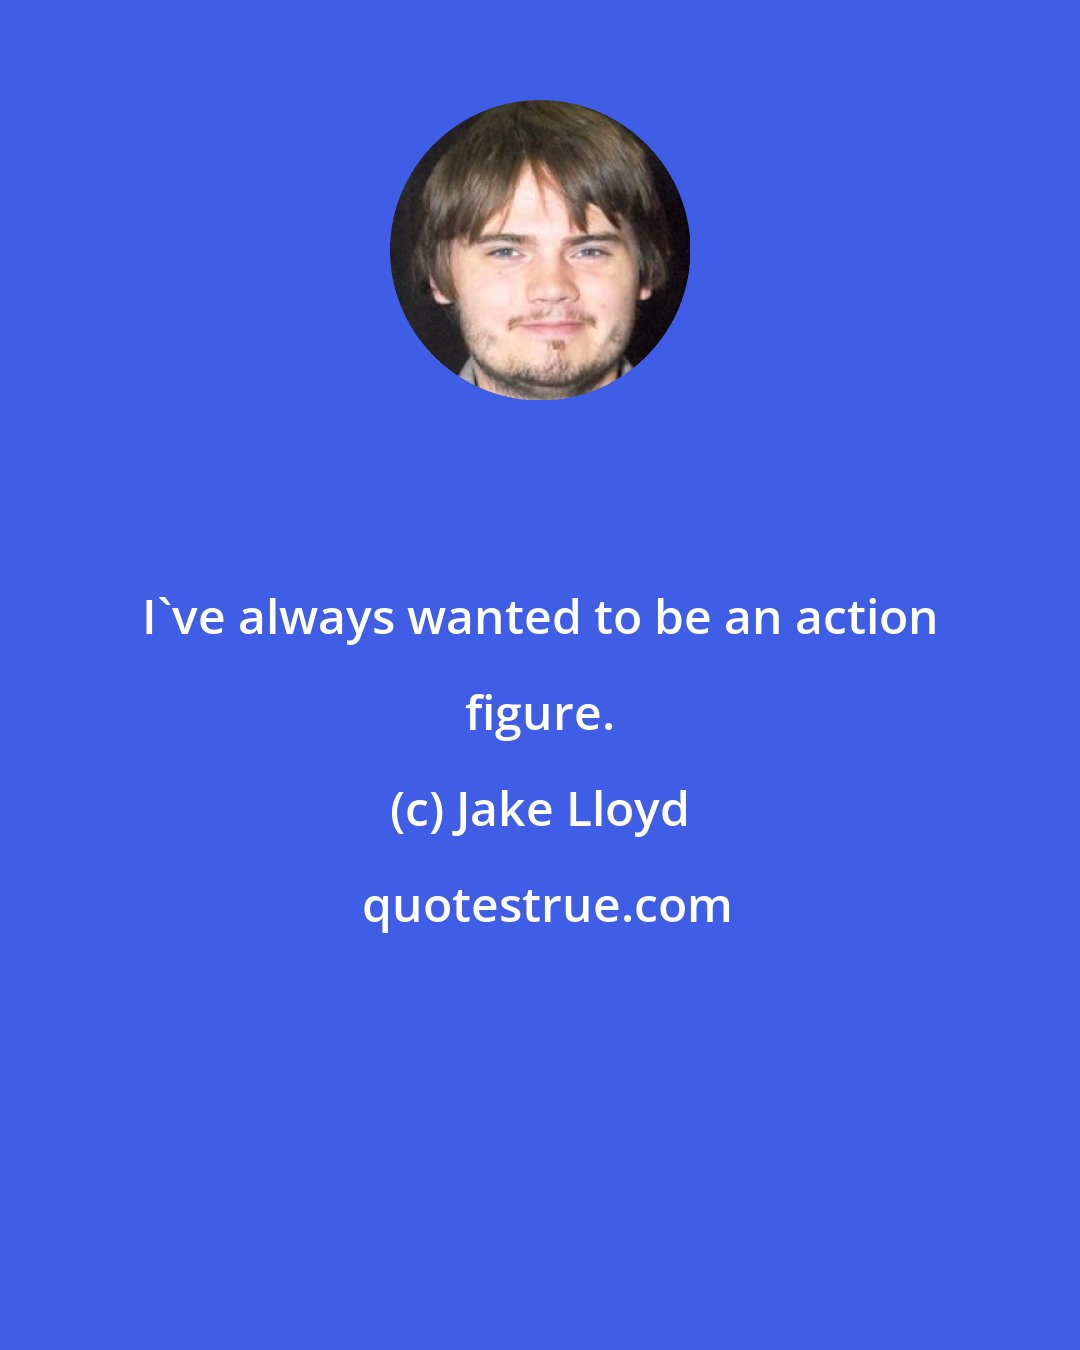 Jake Lloyd: I've always wanted to be an action figure.